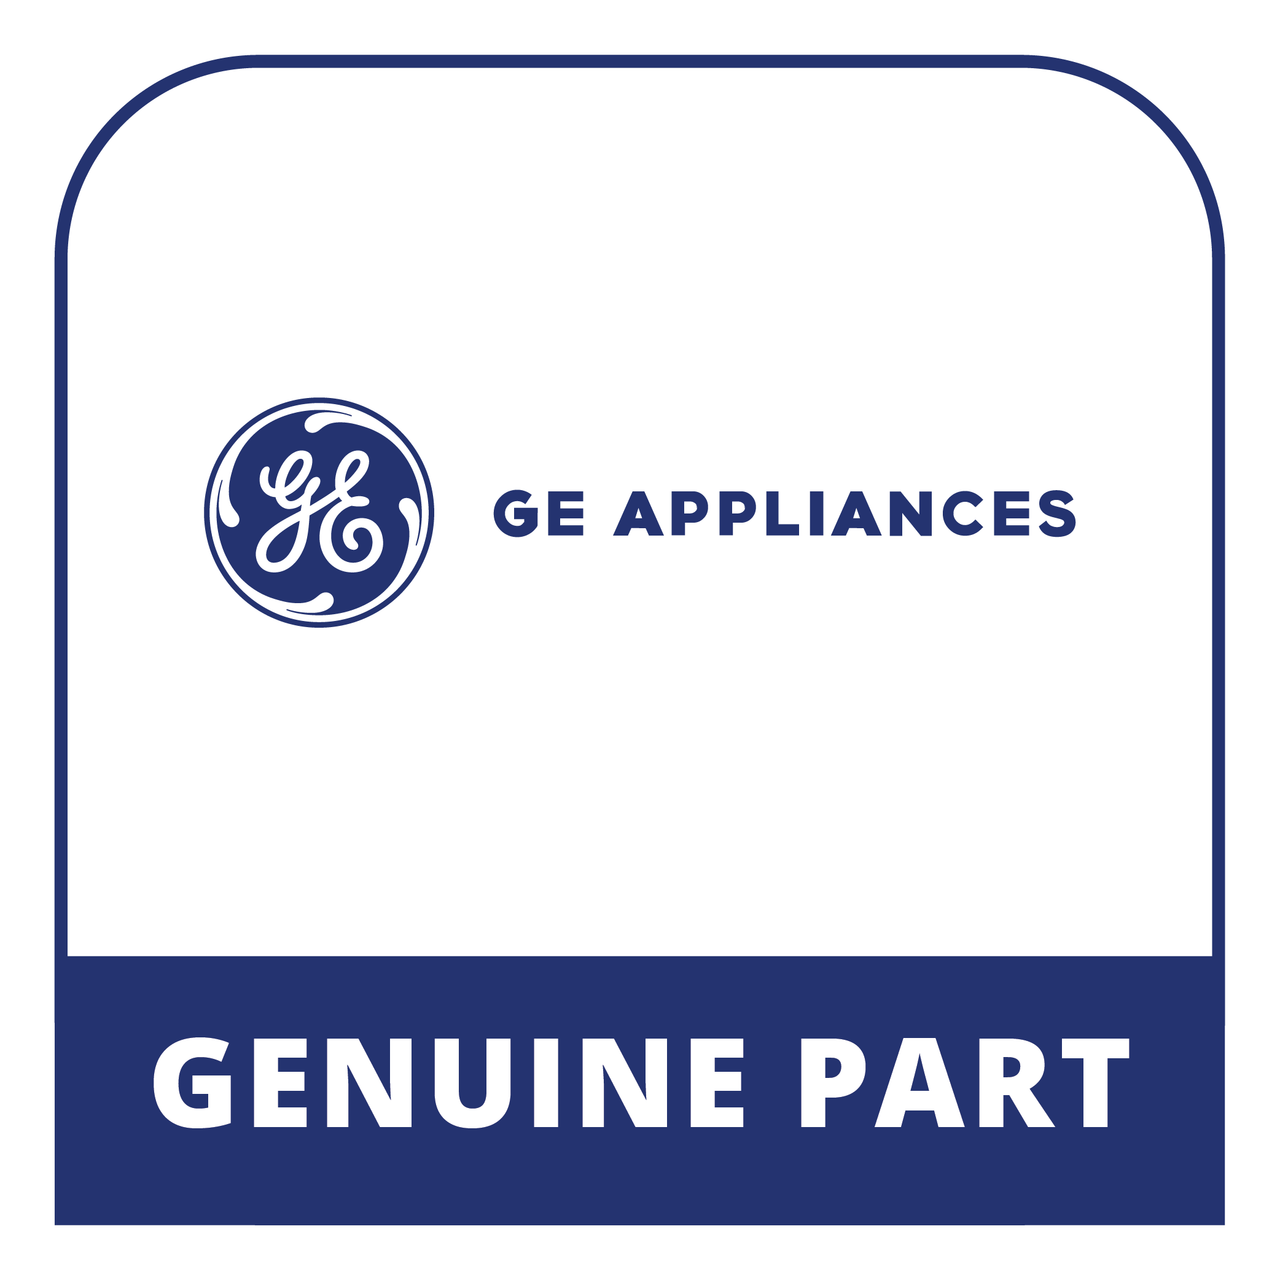 GE Appliances WR78X28544 - Refrigerator Stainless Steel - Right - Genuine Part